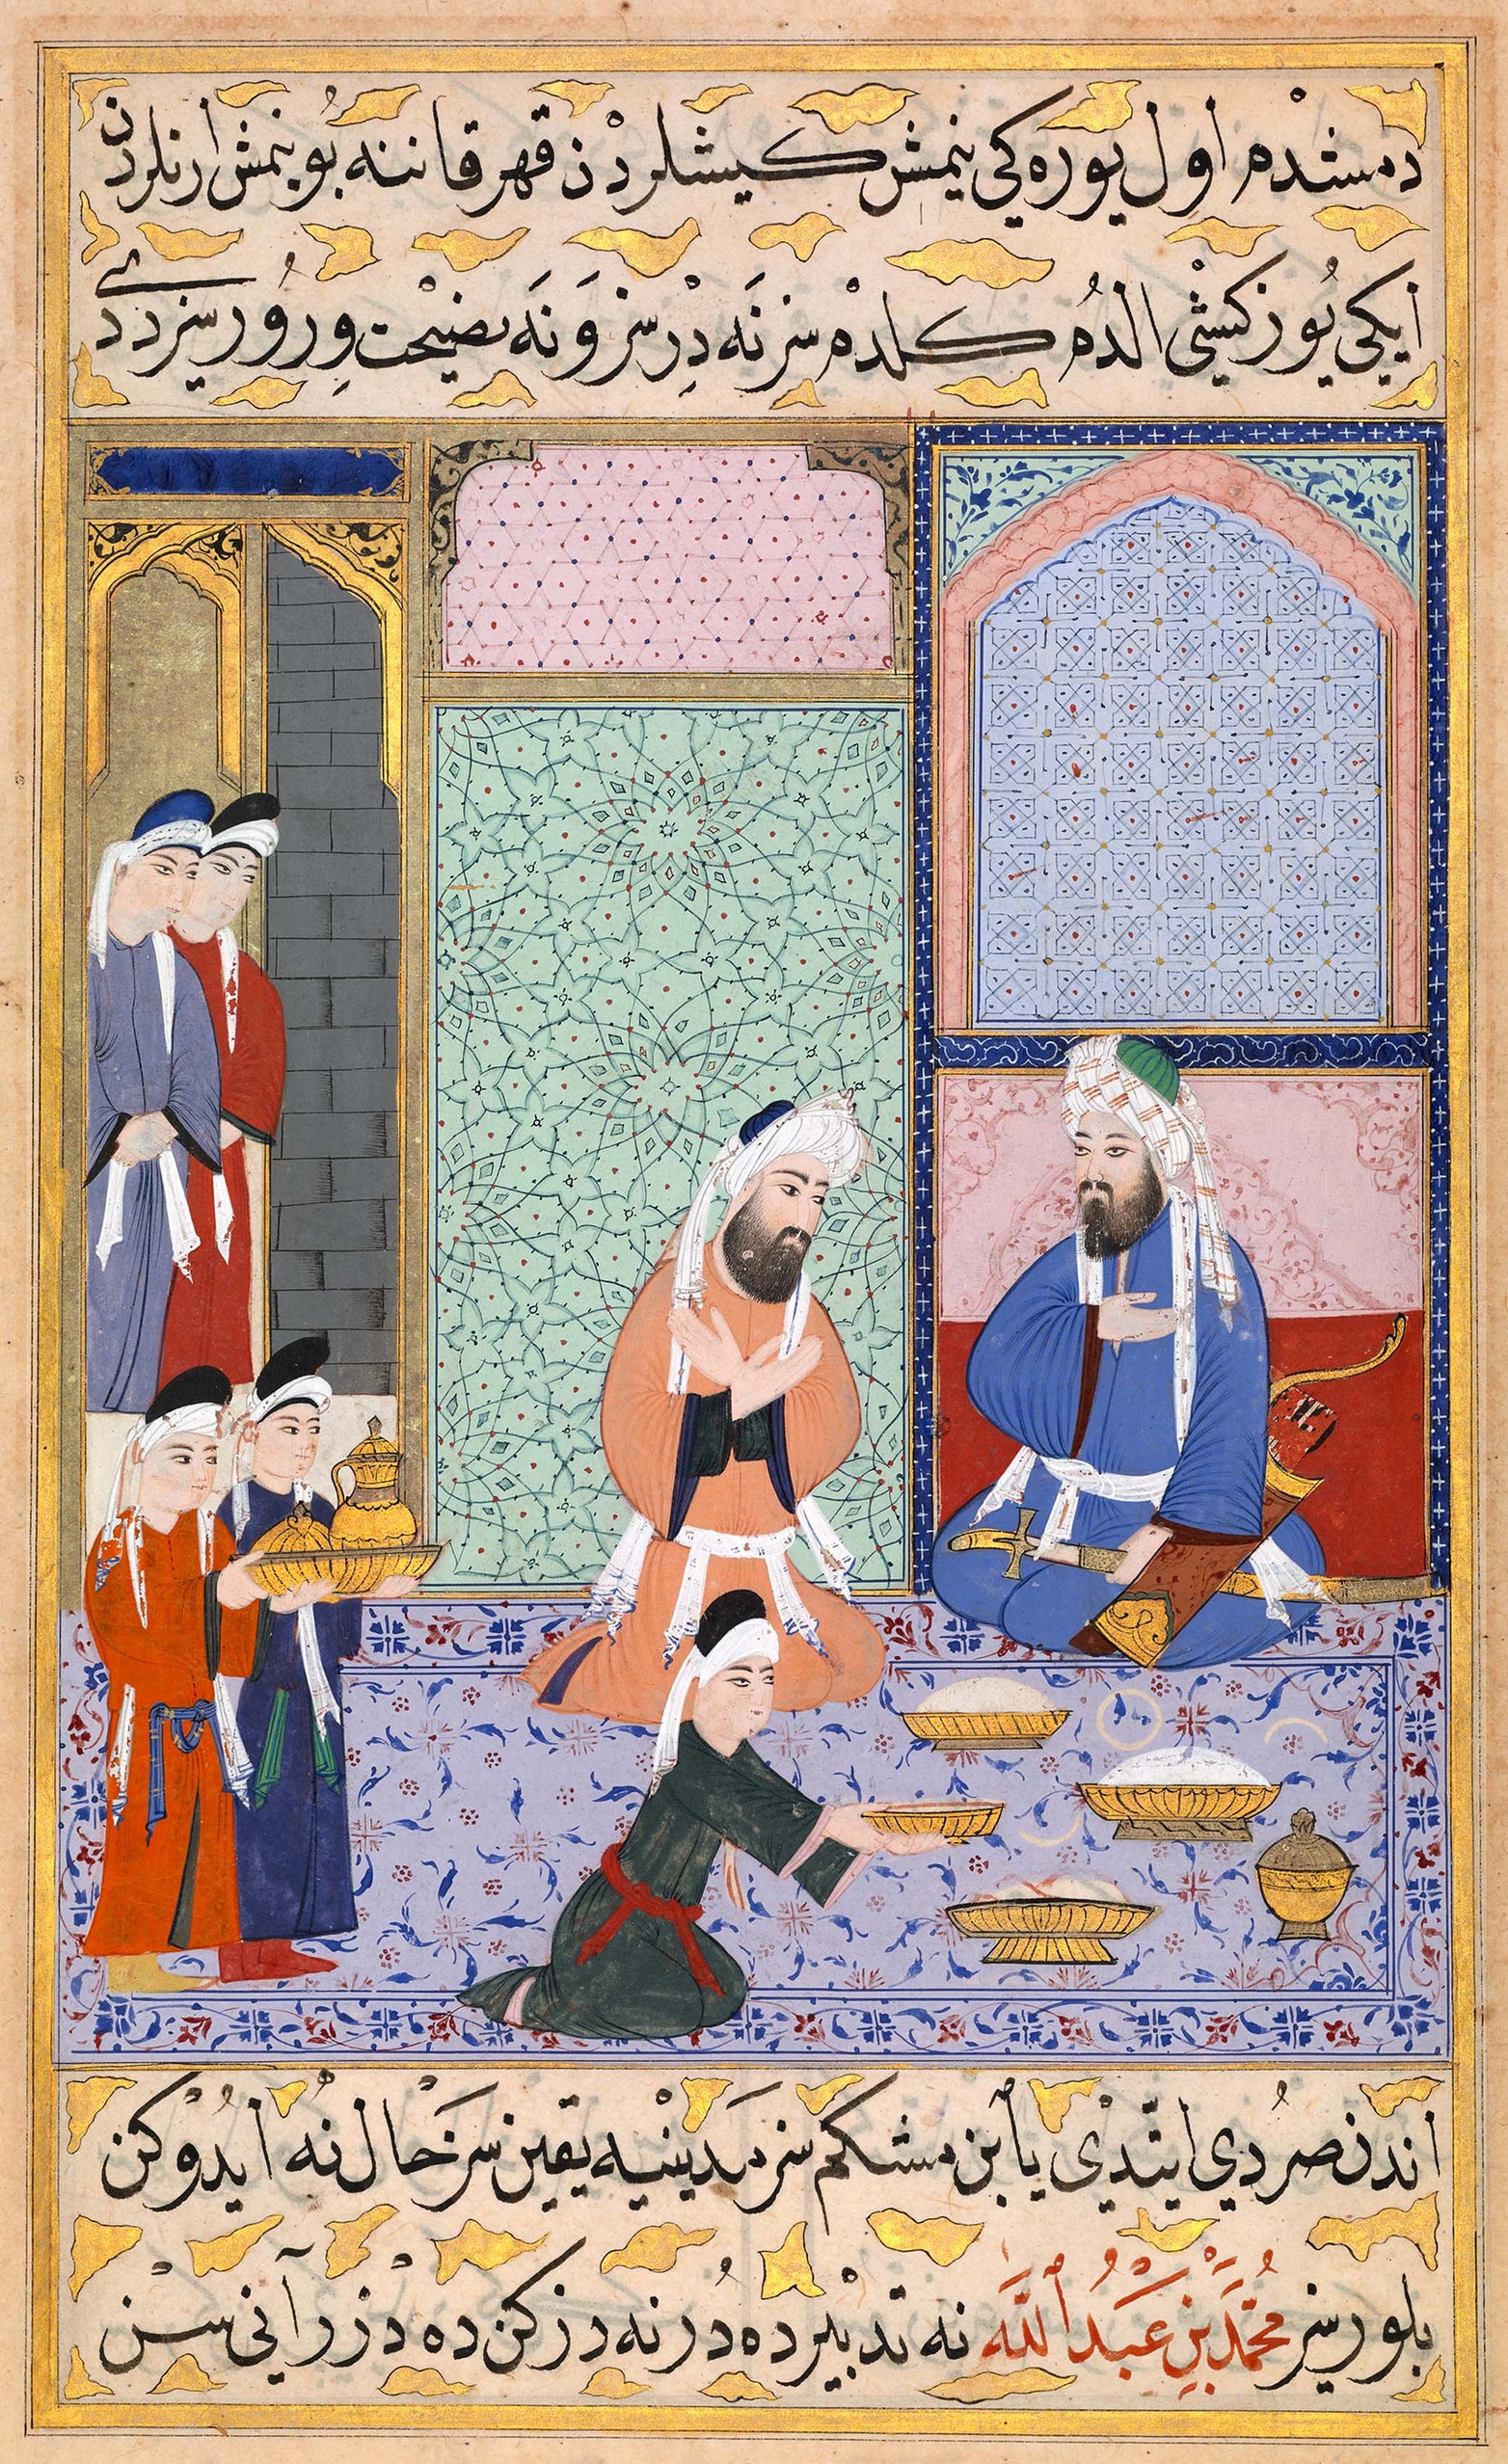 Scene of Feasting from the Siyer-i Nebi (Life of the Prophet) manuscript of Sultan Murad III, Turkey, Istanbul, c. 1594, ink, opaque watercolor, and gold on paper, museum purchase funded by His Highness the Aga Khan Shia Ismaili Community of Houston, The Levant Foundation, Mr. and Mrs. Akbar Ladjevardian, The Francis L. Lederer Foundation, courtesy of Sharon Lederer; Marathon Oil Company, Mr. and Mrs. Omar Rehmatulla, Strategic Real Estate Advisors, London, Monsour Taghdisi, His Excellency Sheikh Sultan bin Suhaim Al Thani, PricewaterhouseCoopers LLP, and the 2007 Art of the Islamic Worlds Gala, 2007.1305, Museum of Fine Arts, Houston